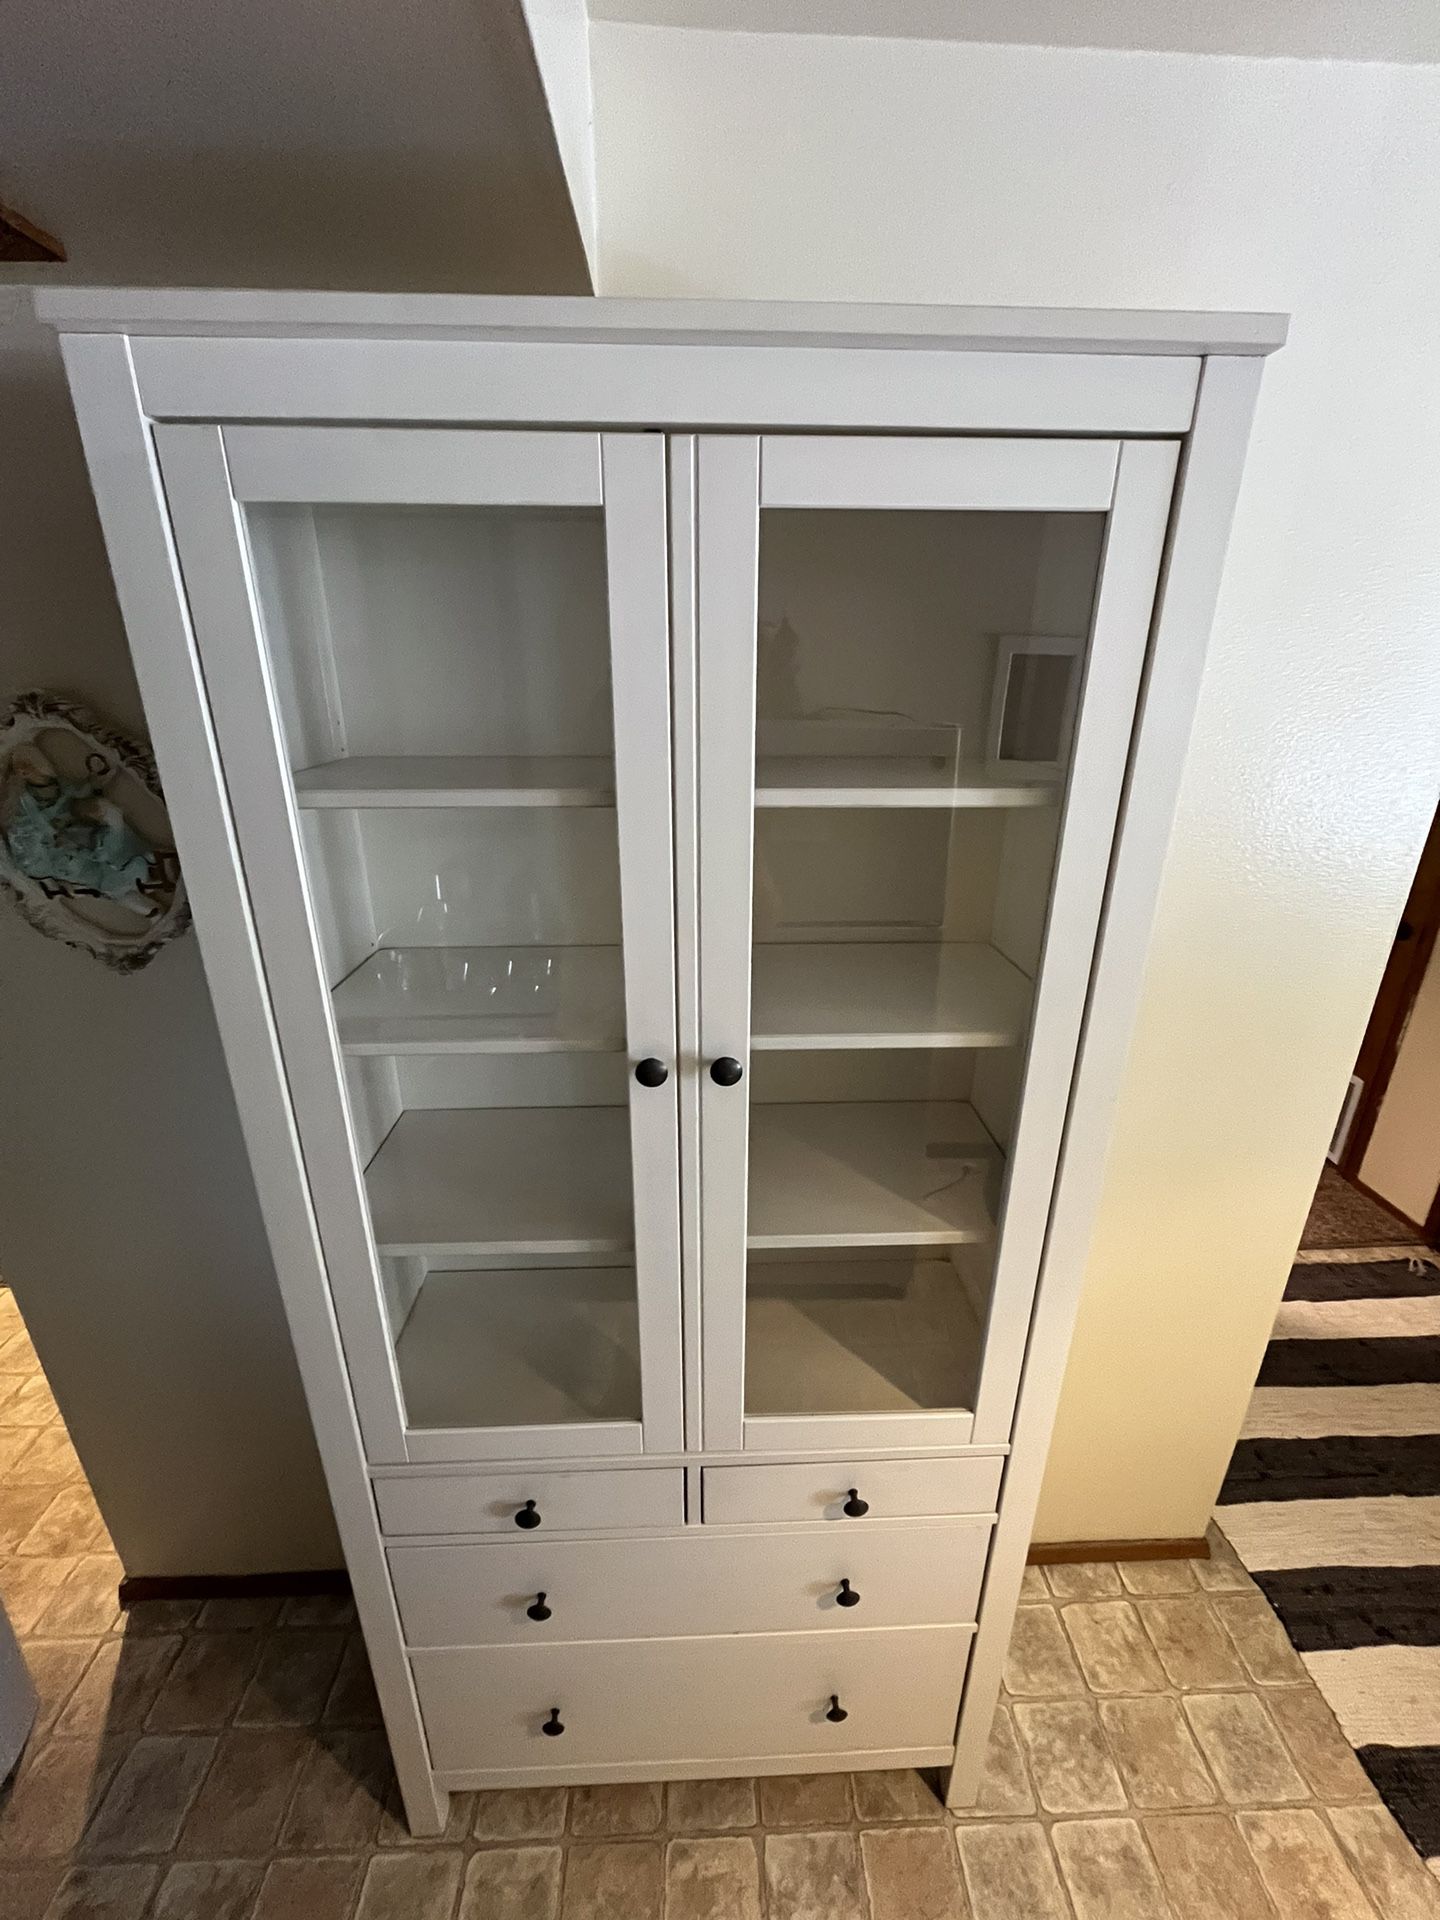 White Hutch With Glass Doors, Shelves, And Drawers 